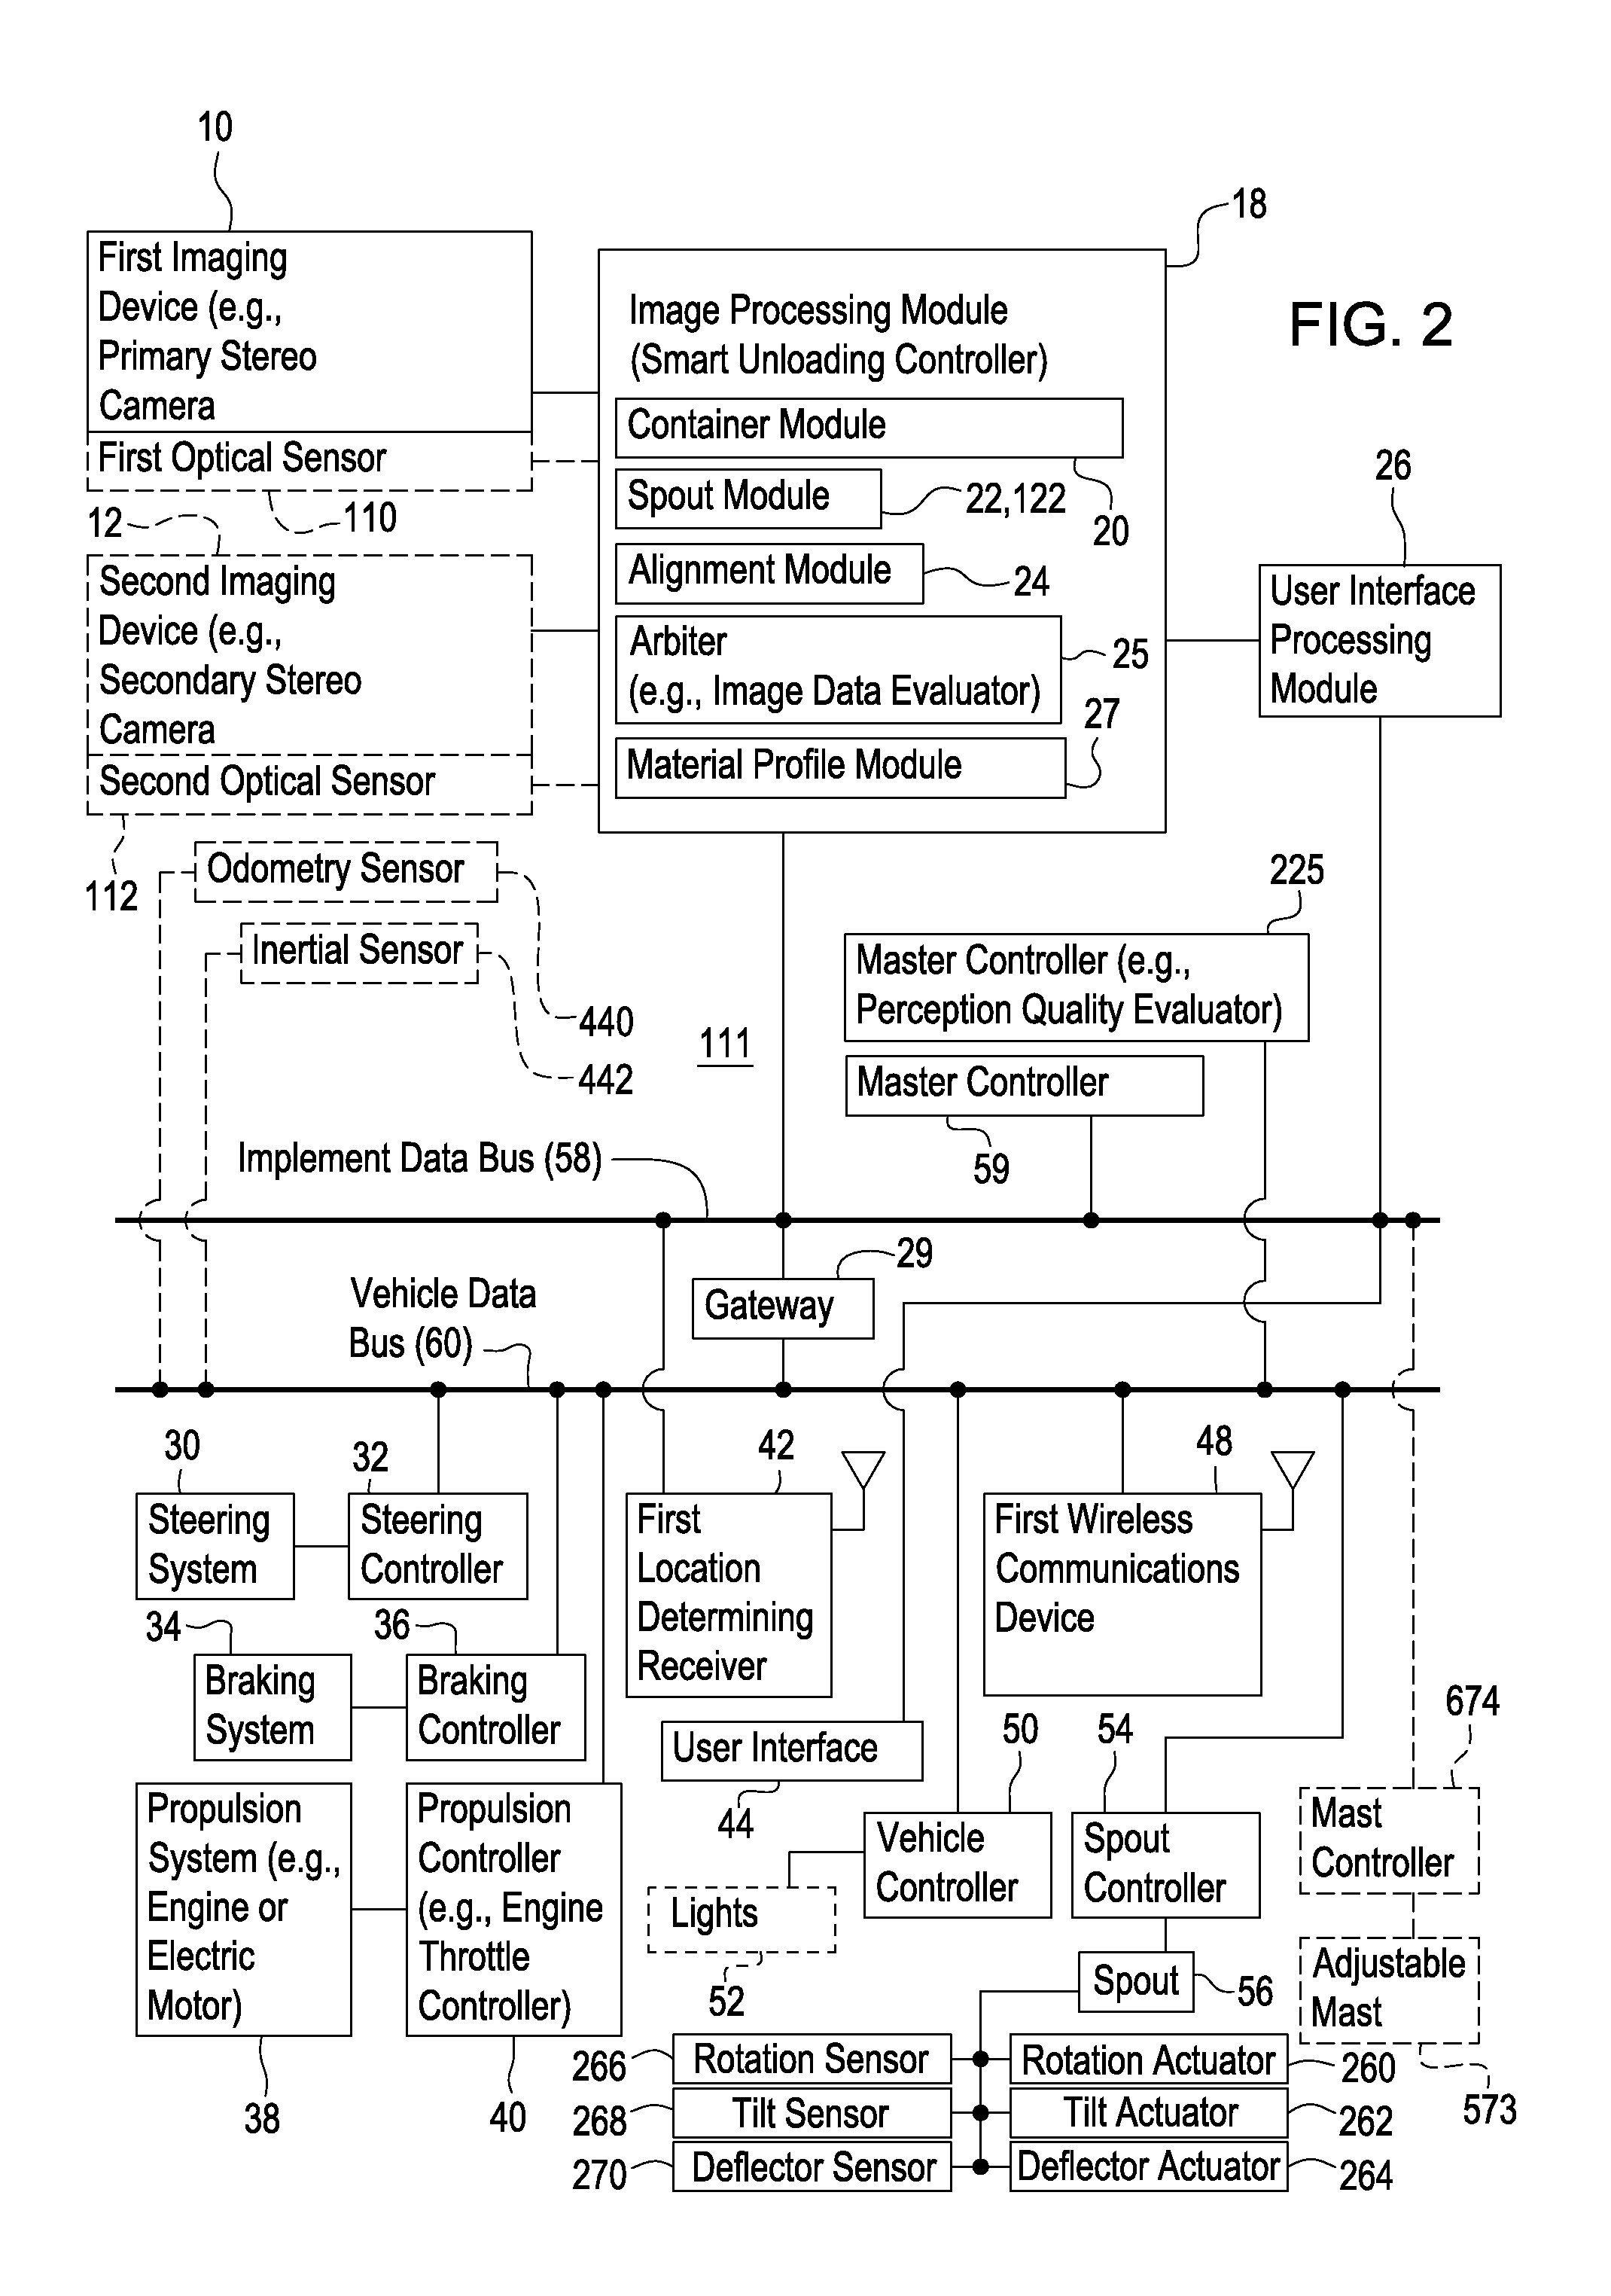 Method and stereo vision system for facilitating the unloading of agricultural material from a vehicle